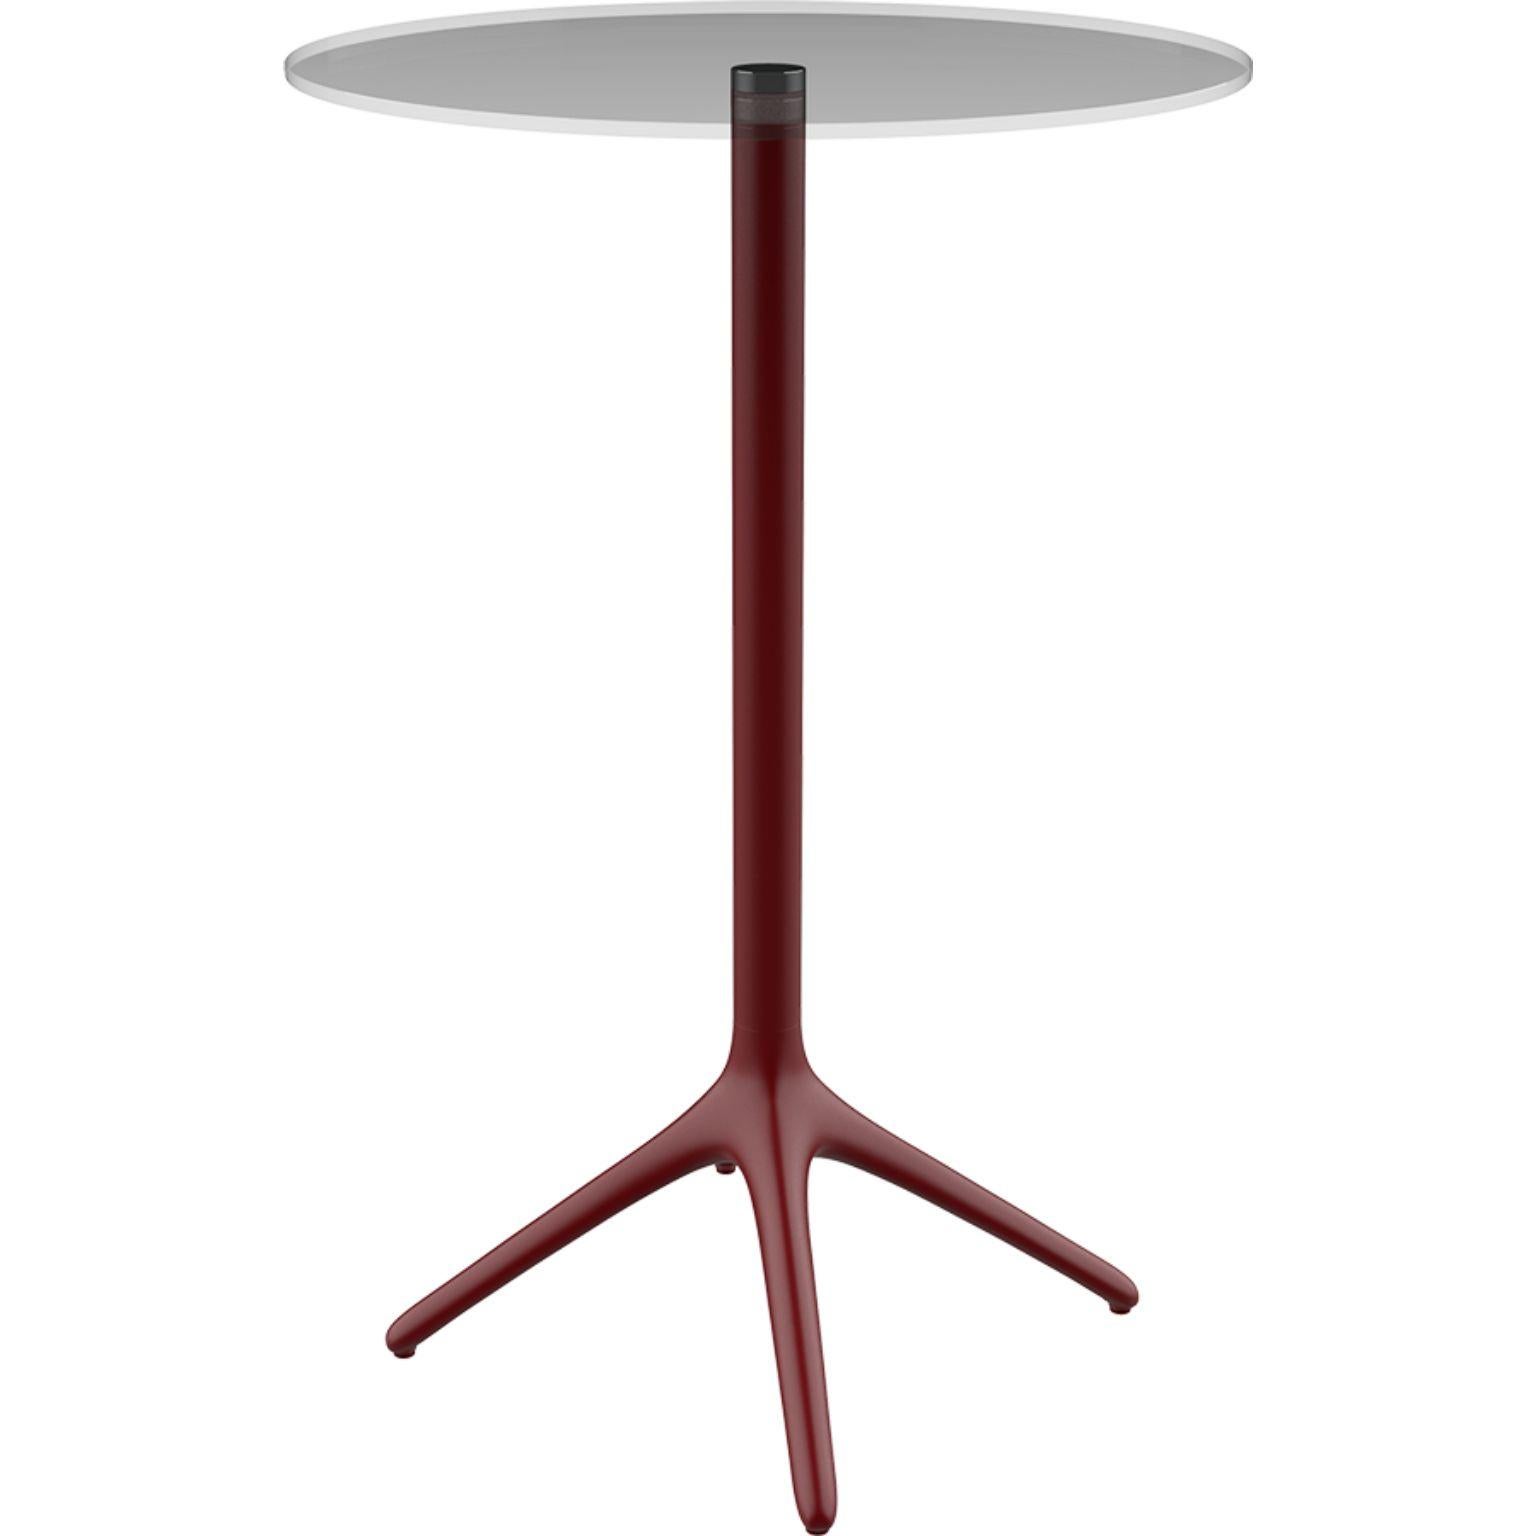 Uni Burgundy table 105 by MOWEE
Dimensions: D 45.5 x H 105 cm
Material: Aluminium, tempered glass
Weight: 6.2 kg
Also available in different colours and finishes. Collapsable version available.

A table designed to be as versatile as possible